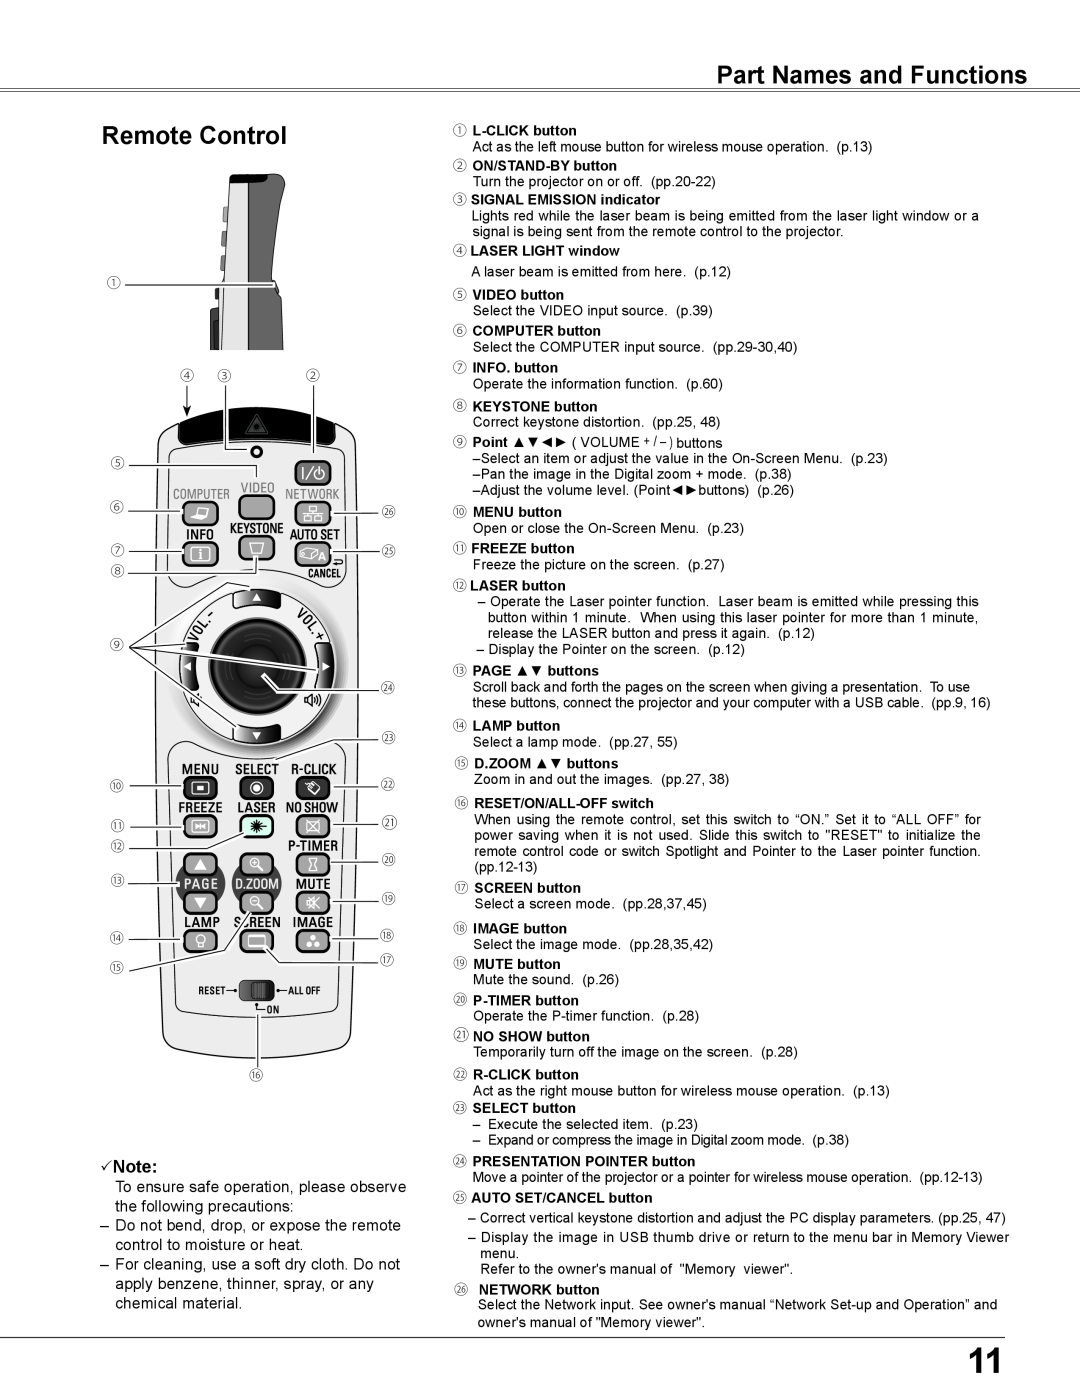 Sanyo PLC-XU305A, PLC-XU355A owner manual Remote Control, Part Names and Functions, Note 